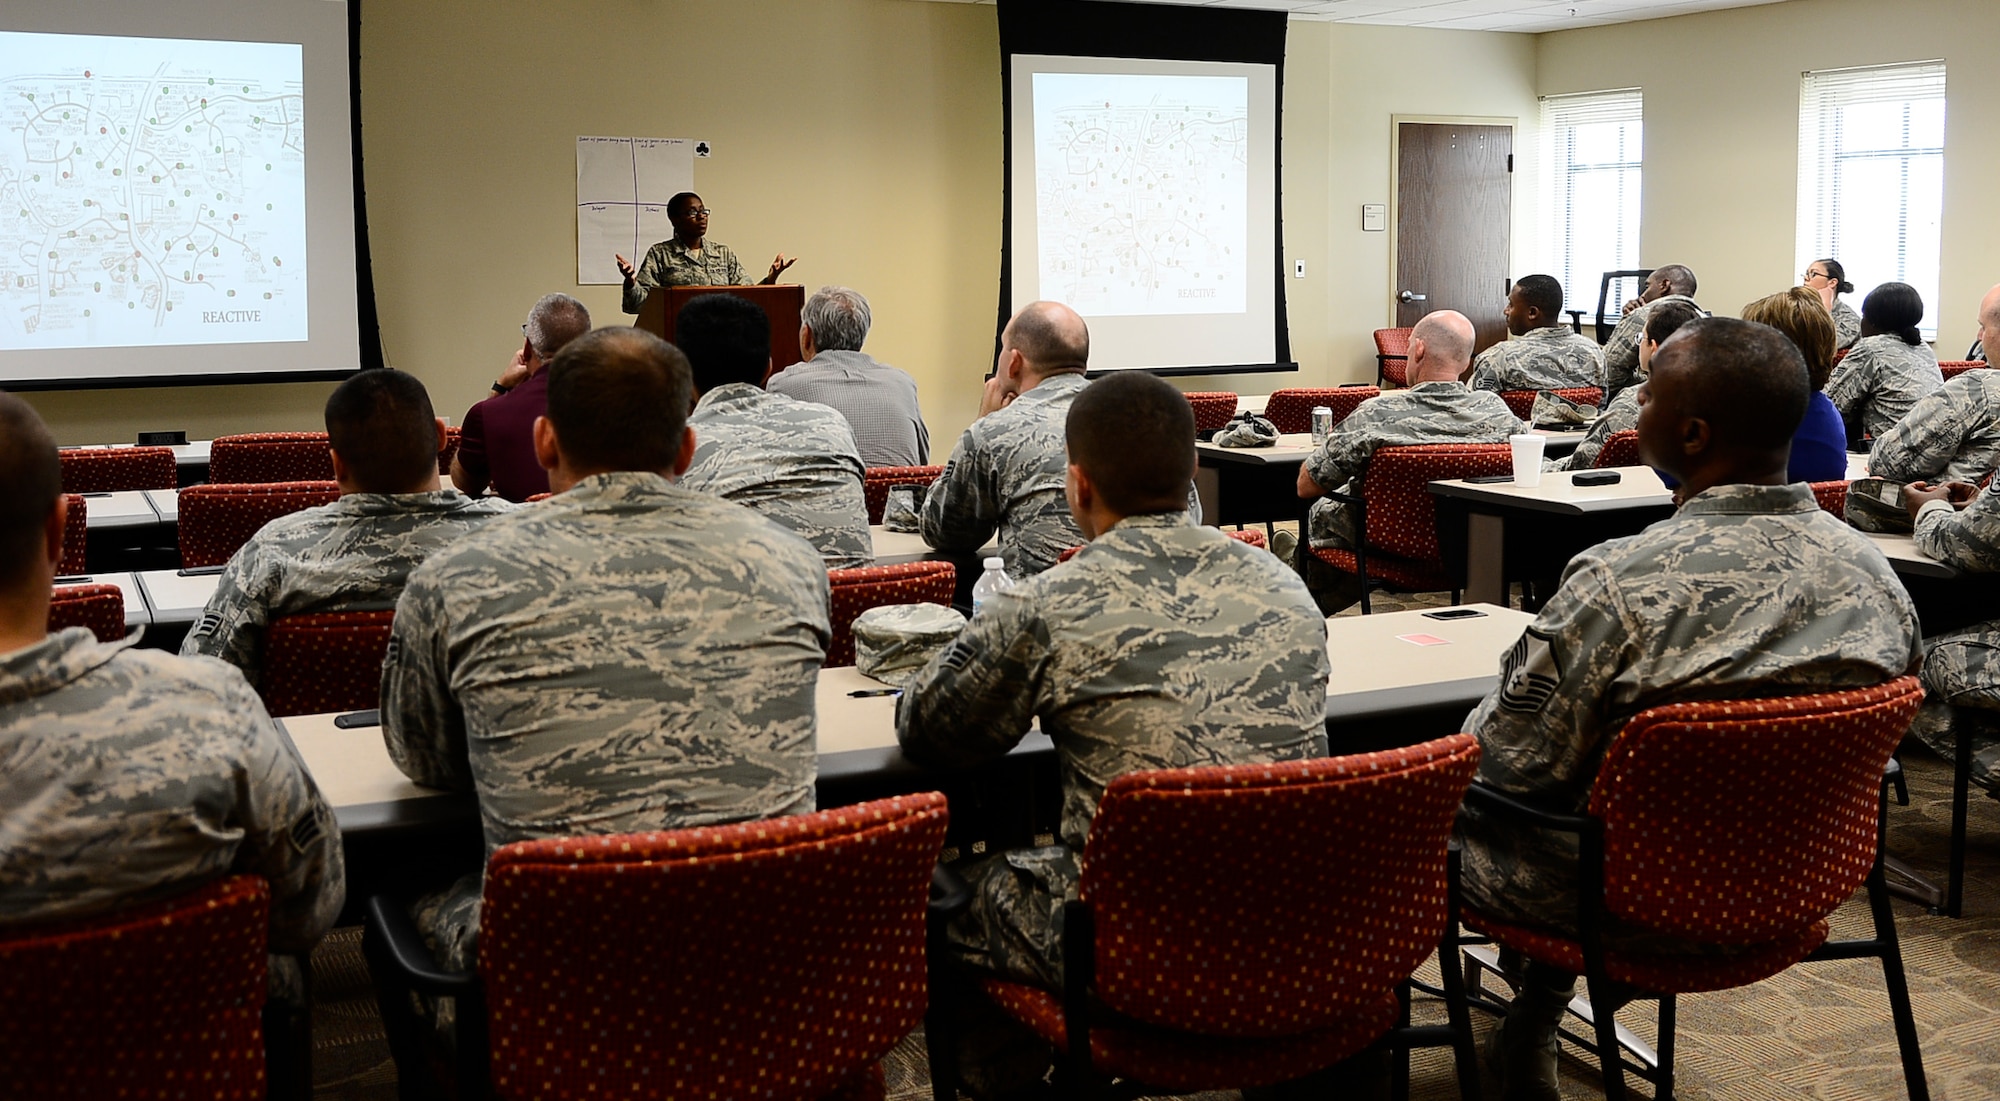 Tech. Sgt. Quanna Charles, a Green Dot representative assigned to the 6th Air Mobility Wing, conducts a one-hour Green Dot Training session on MacDill Air Force Base, Fla., June 8, 2016. The Green Dot program focuses on providing tools and training through activities, open dialogue and a peer-to-peer learning style to create realistic options for preventing violent events. (U.S. Air Force photo by Senior Airman Tori Schultz)